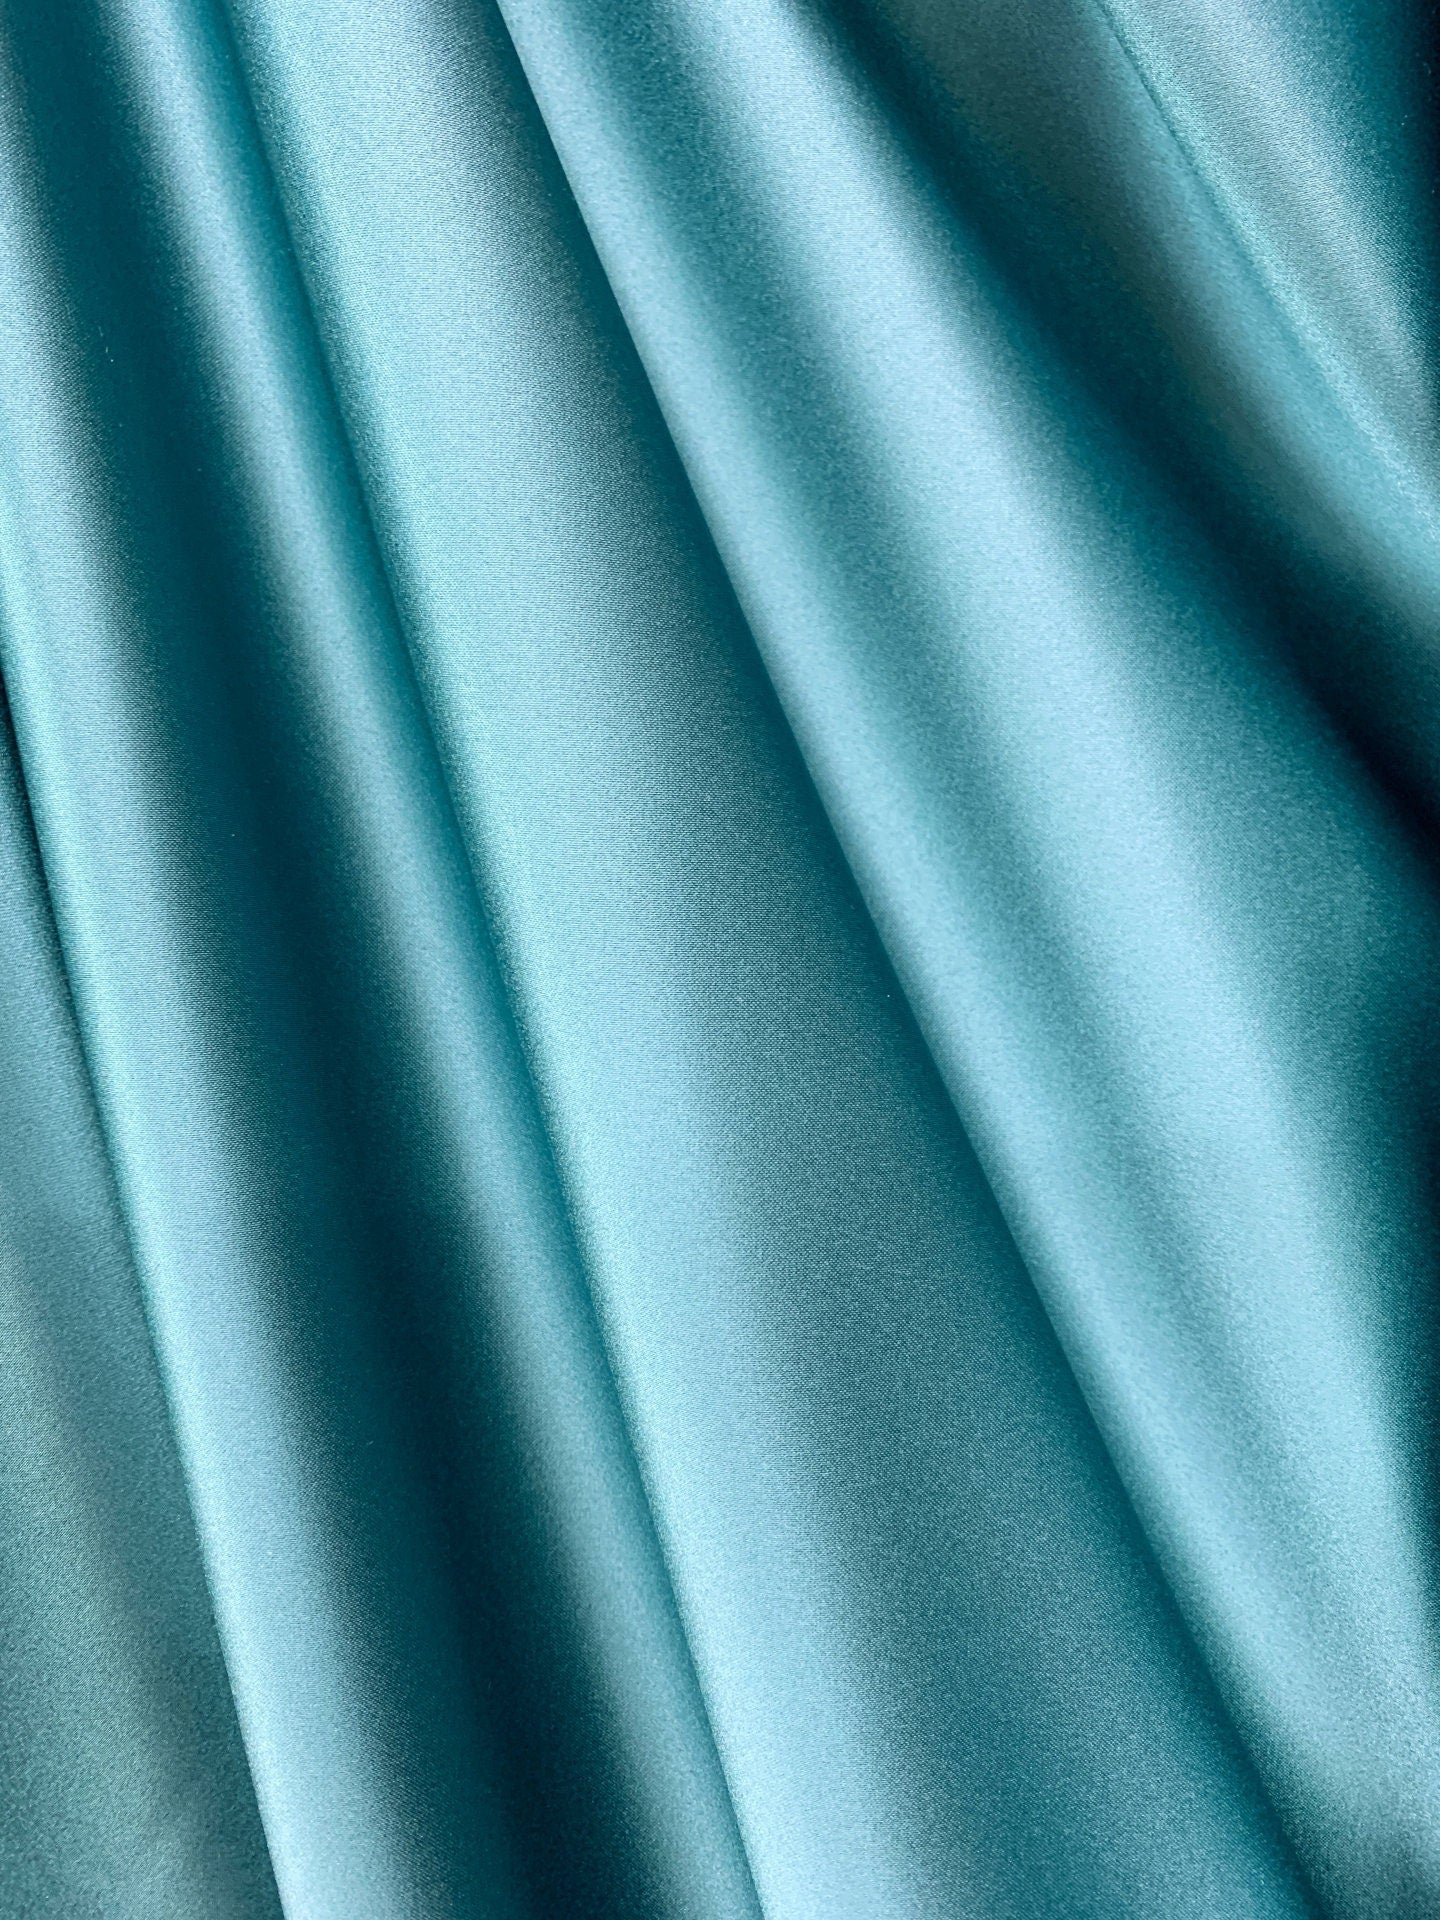 DARK TEAL BLUE Solid 100% Polyester Mystique Satin Fabric (60 in.) Sold By The Yard